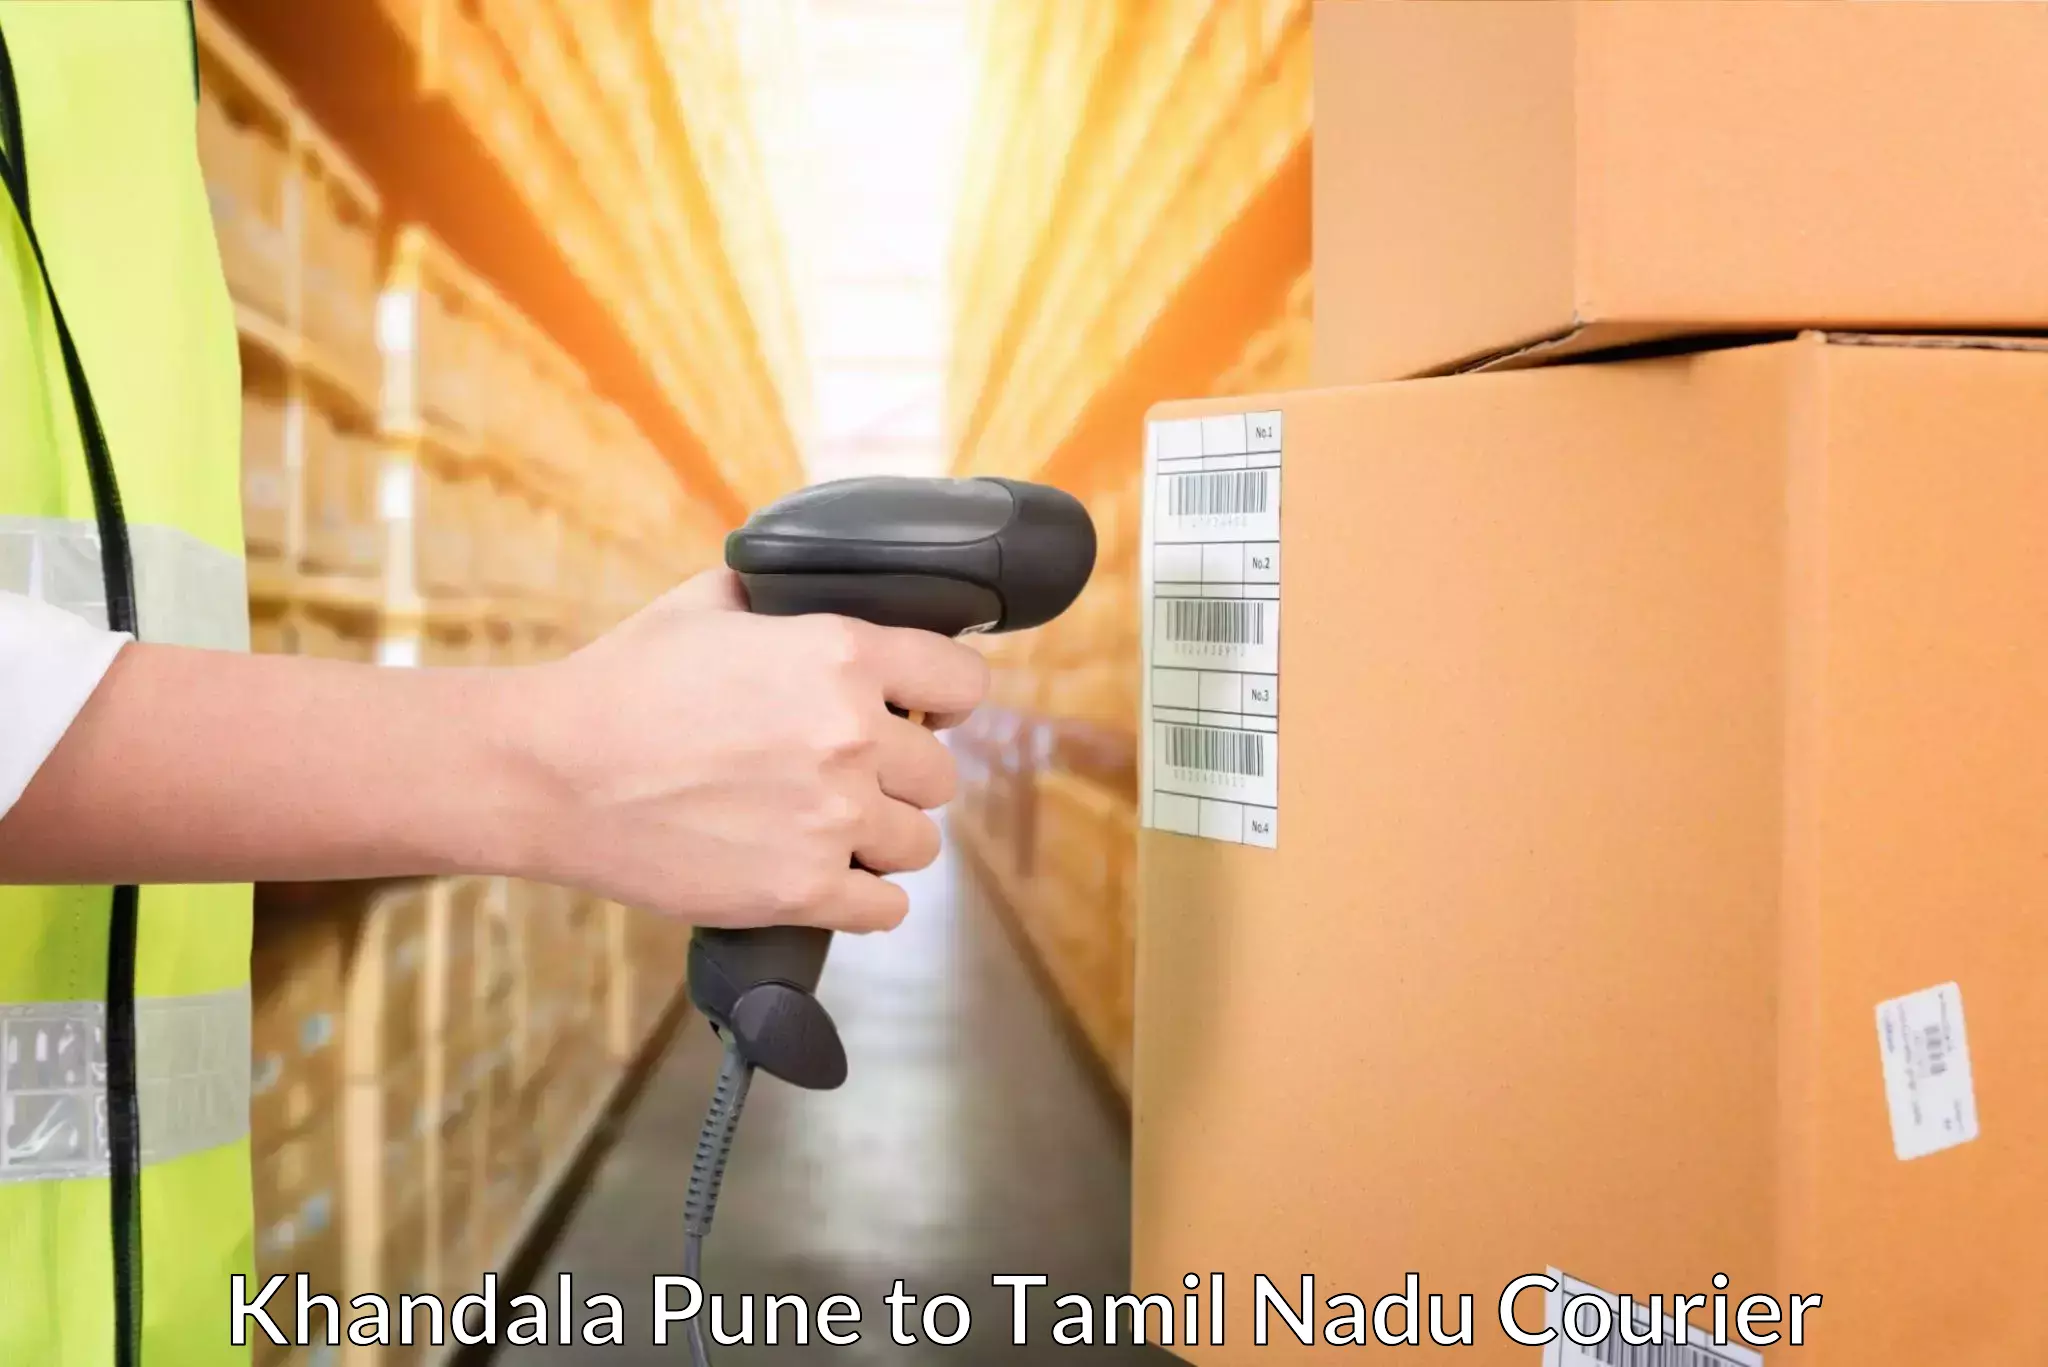 Full-service courier options Khandala Pune to Trichy